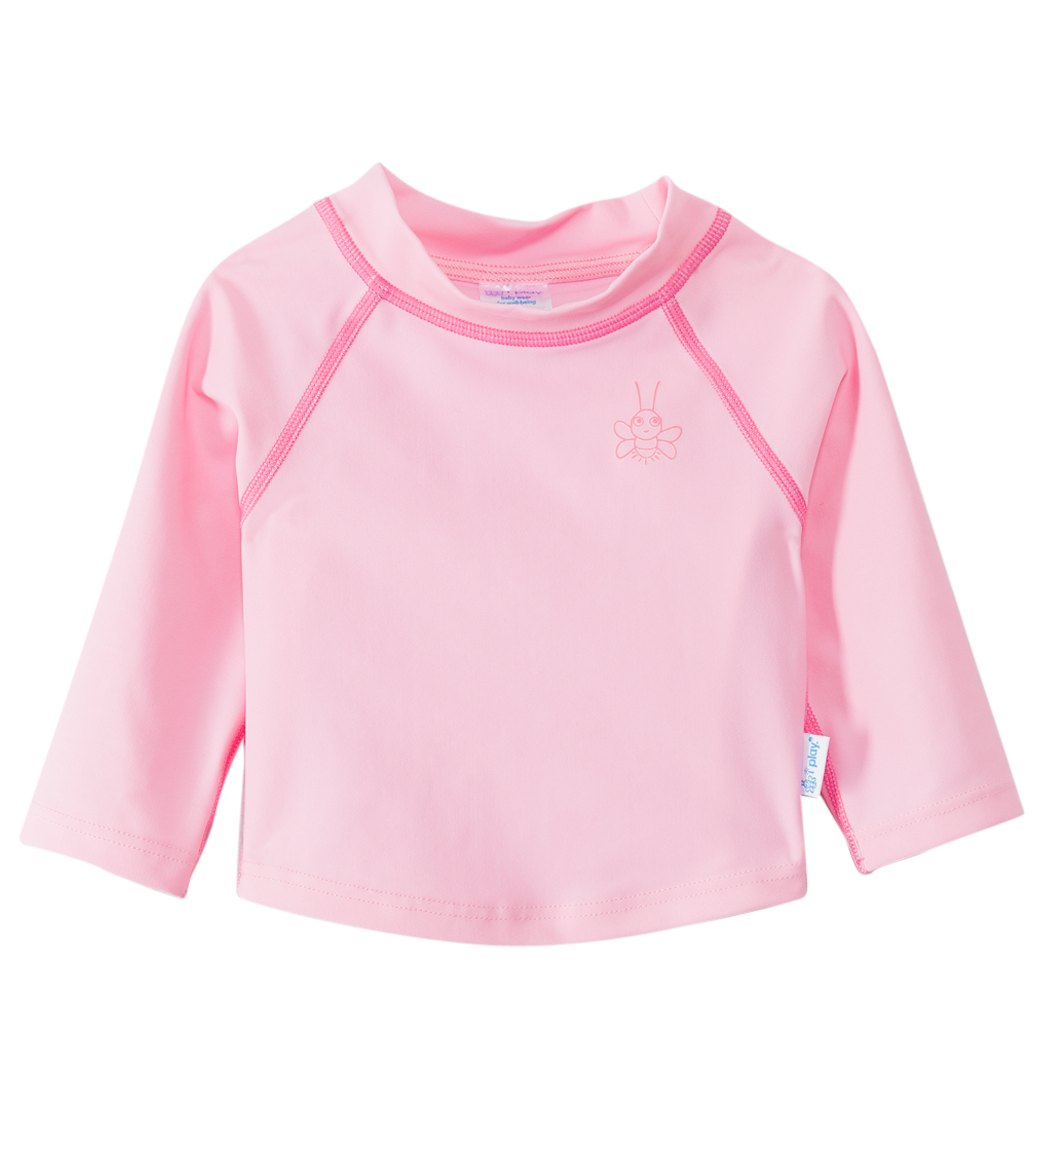 I Play. By Green Sprouts Long Sleeve Rashguard Baby - Pink Medium 12 Months Lycra® - Swimoutlet.com